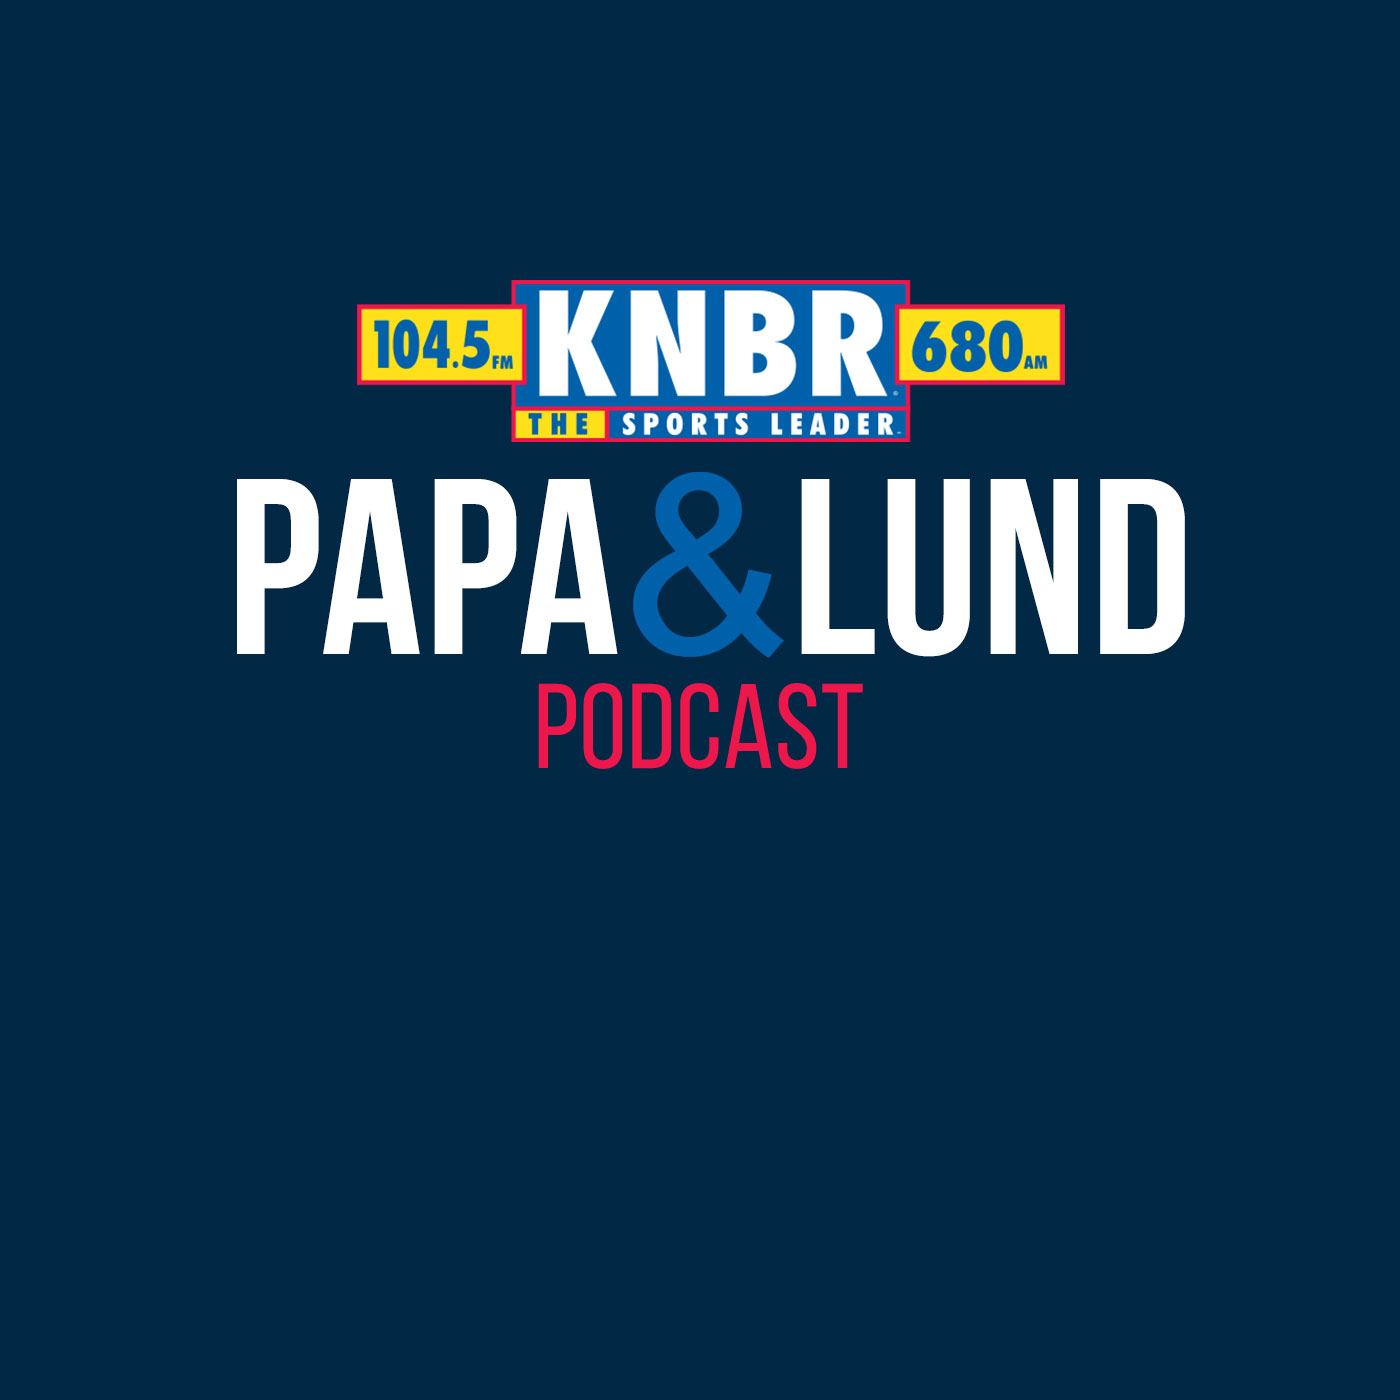 11-29 Ramona Shelburne joins Papa & Lund to discuss the Warriors blowing a 24 point lead in Sacramento and where the Warriors find themselves after a rough ending to November